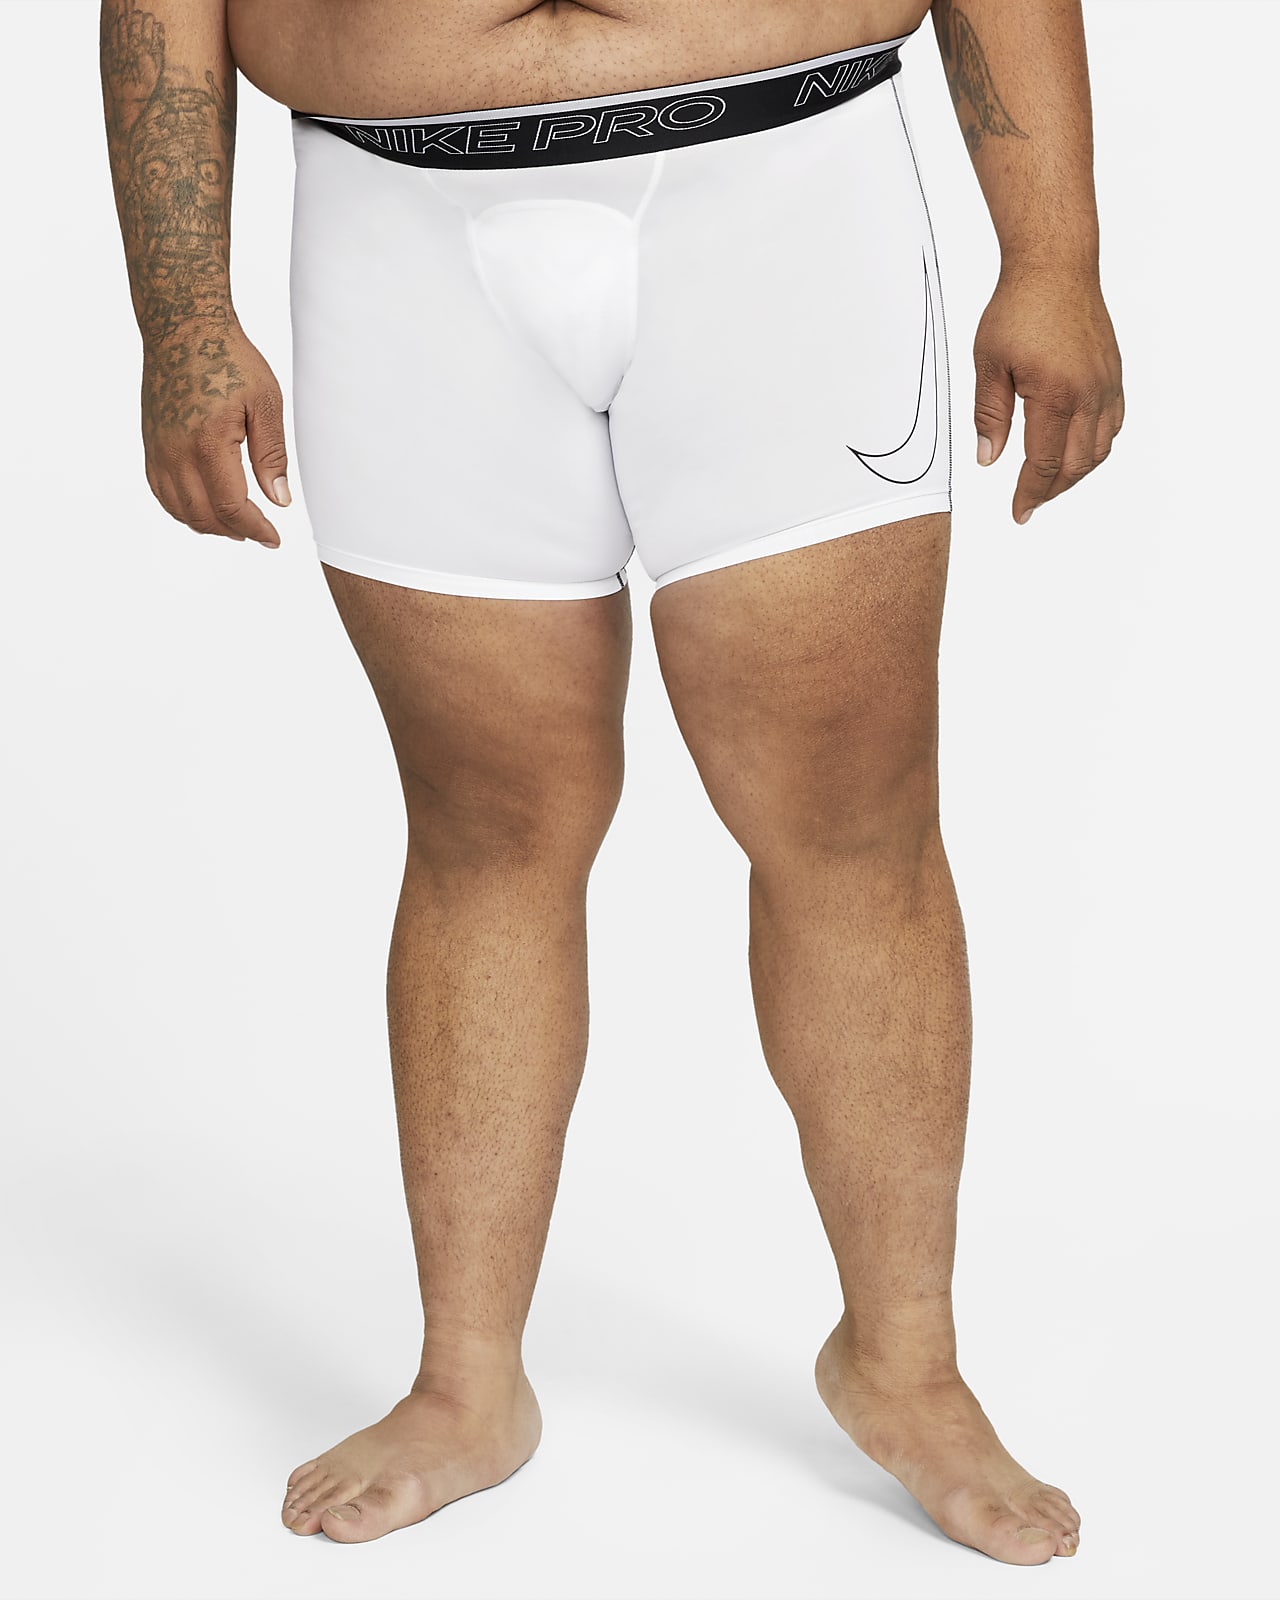 Cuissard Nike Nike Pro pour Homme - DH8128